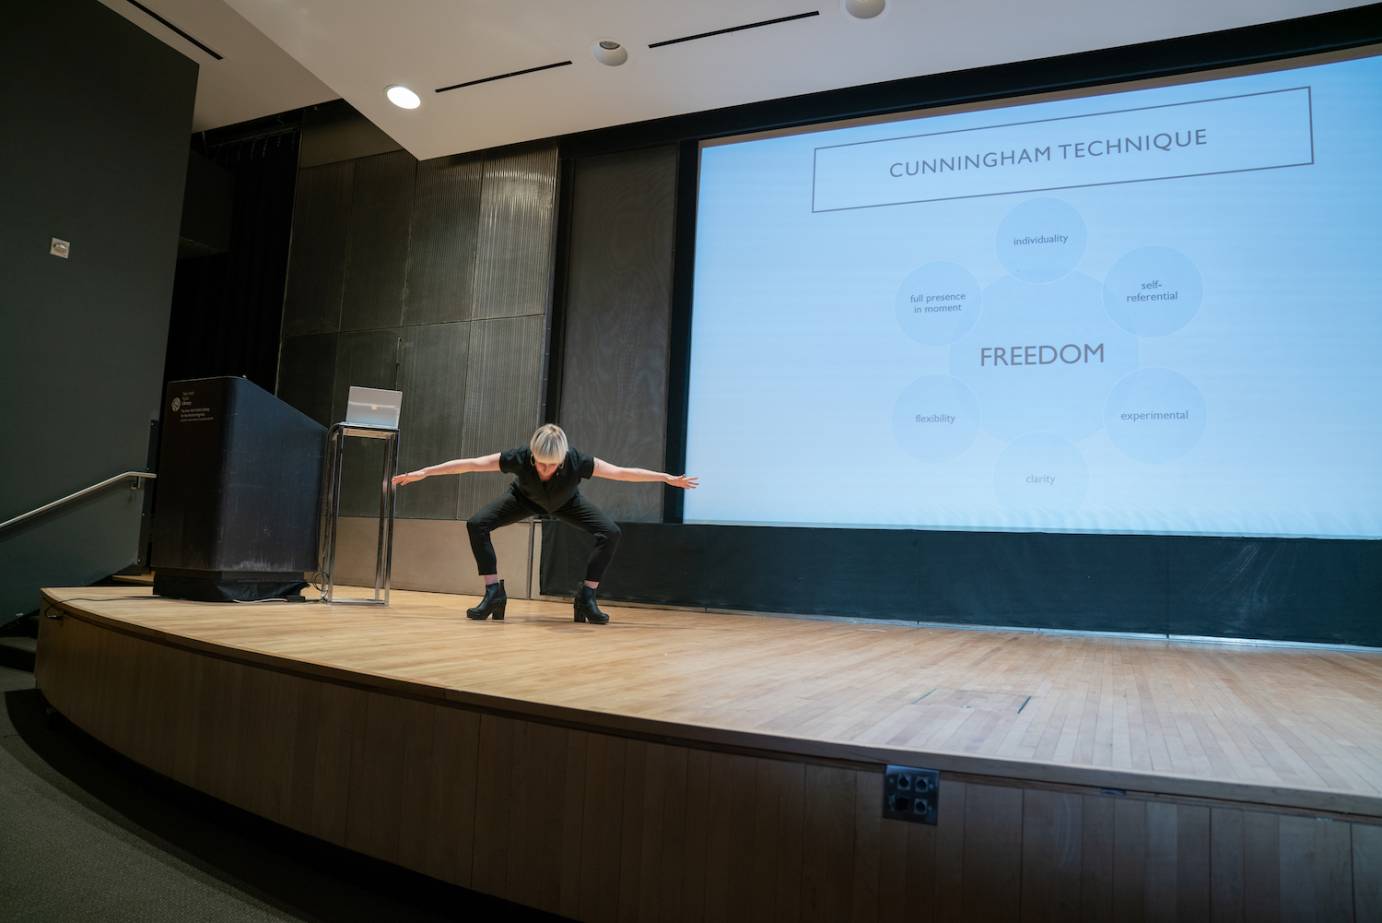 A woman bends in a deep squat against a PowerPoint graphic of Cunningham technique